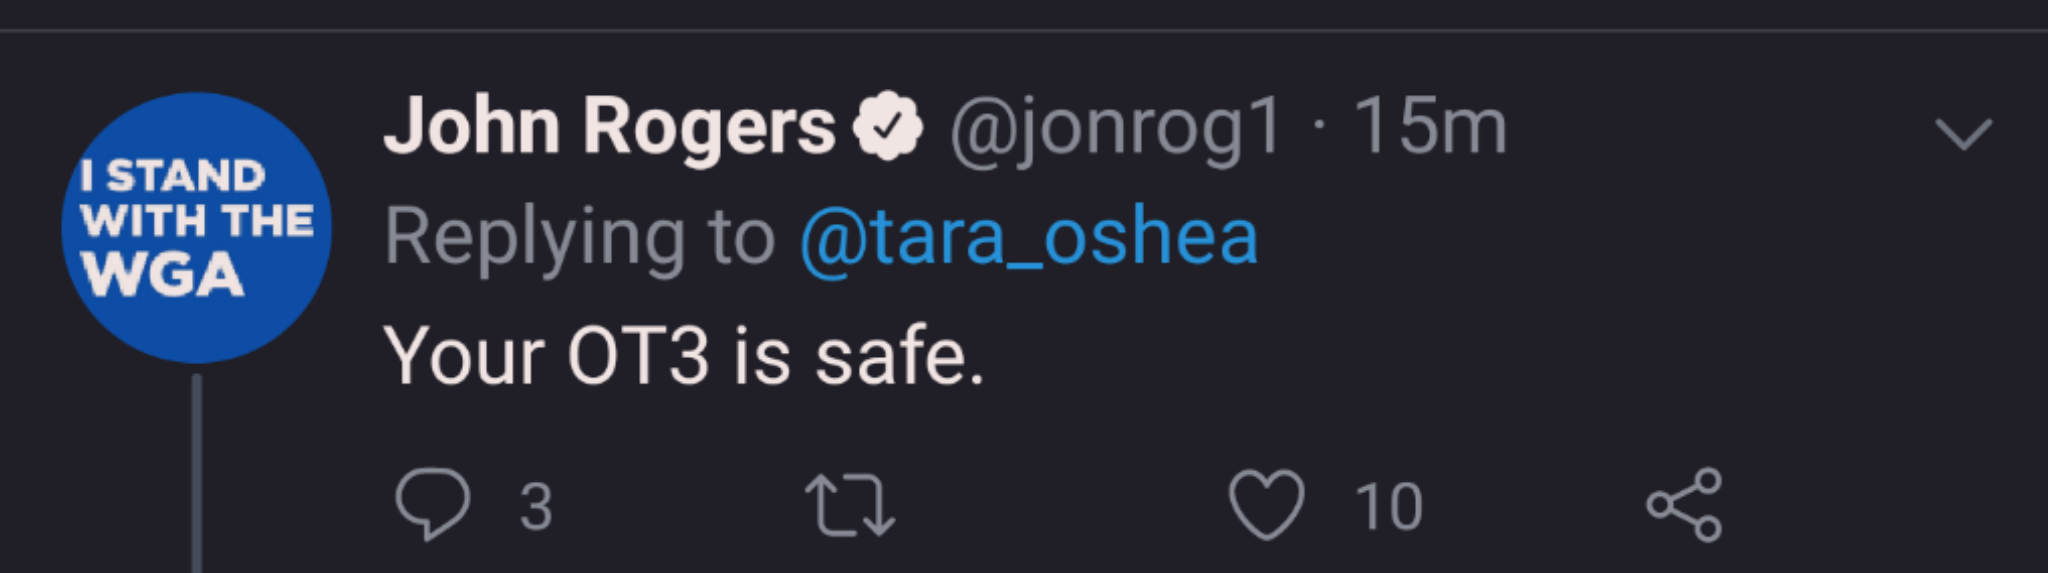 tweet from John Rogers: Your OT3 is safe.